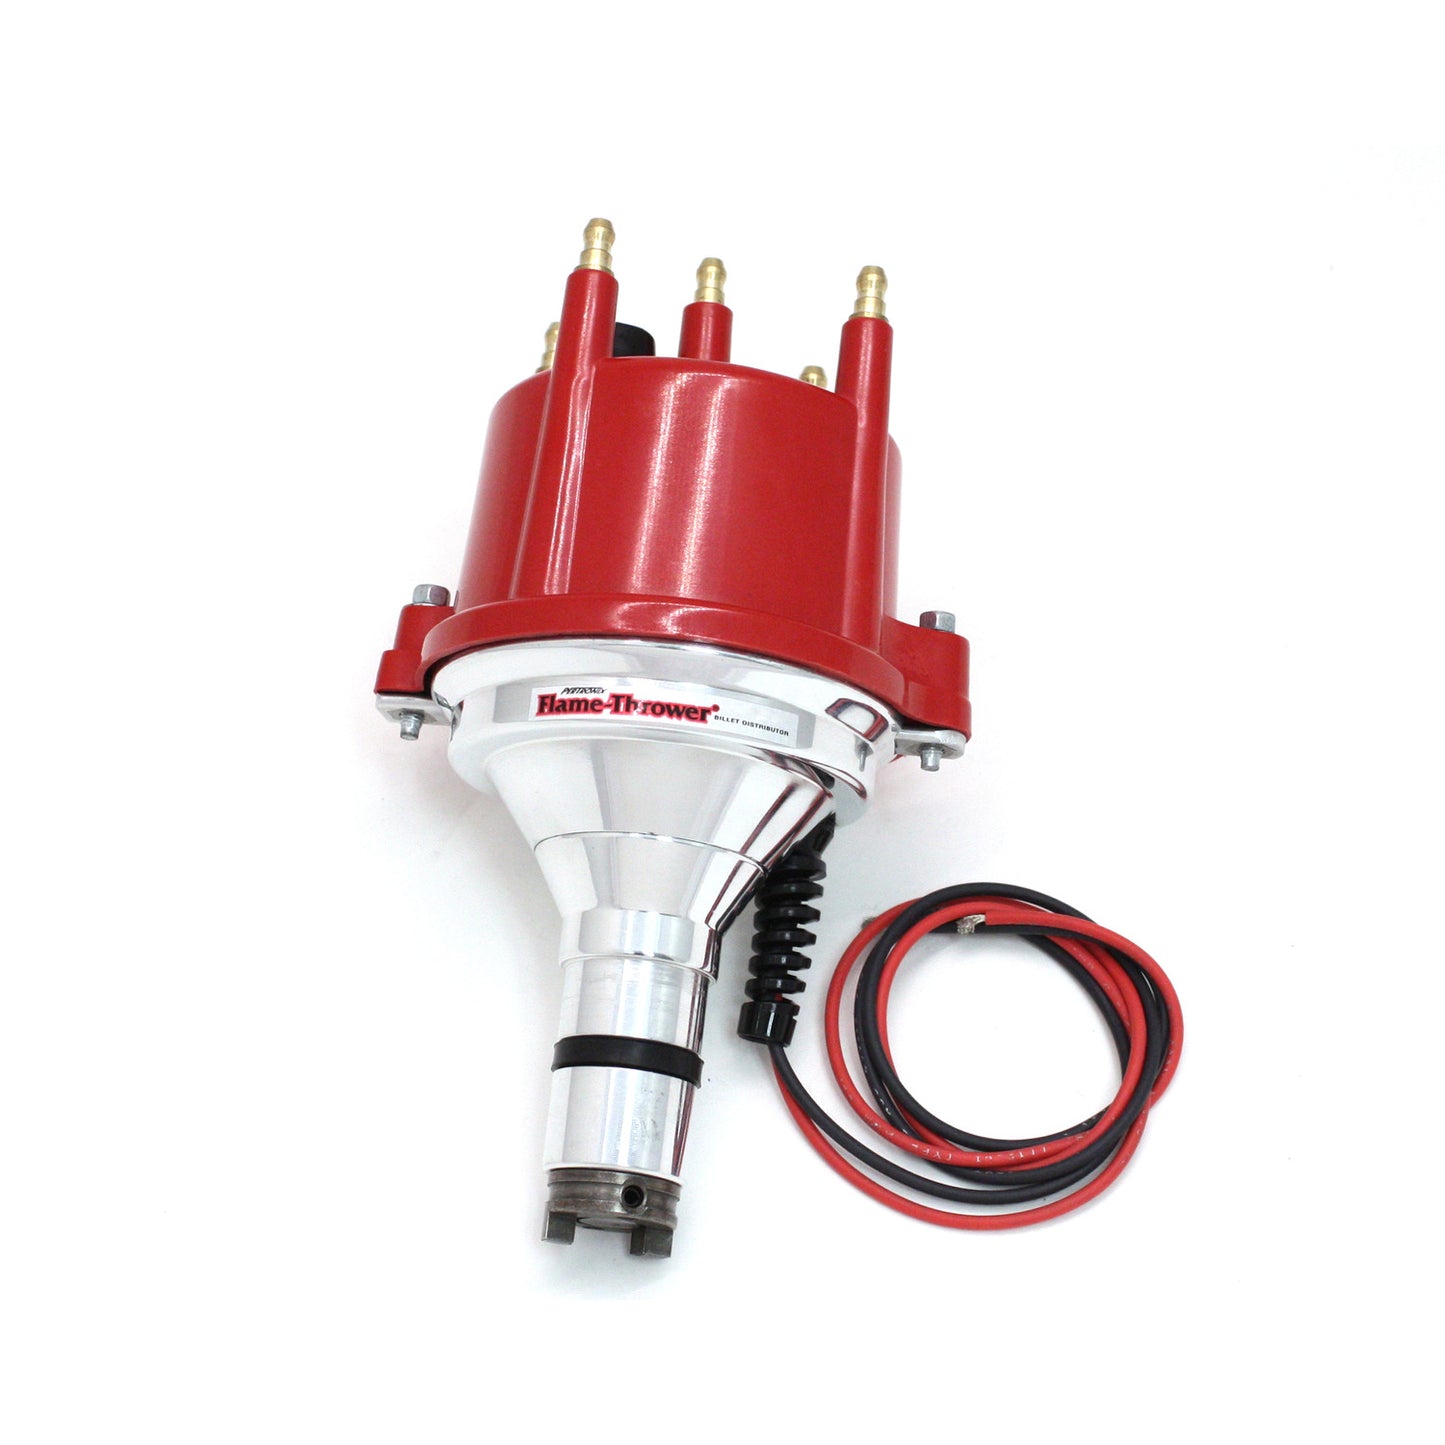 PerTronix D180811 Flame-Thrower Electronic Distributor Billet VW Type 1 Engine Plug and Play with Ignitor II Technology Non Vacuum Red Cap